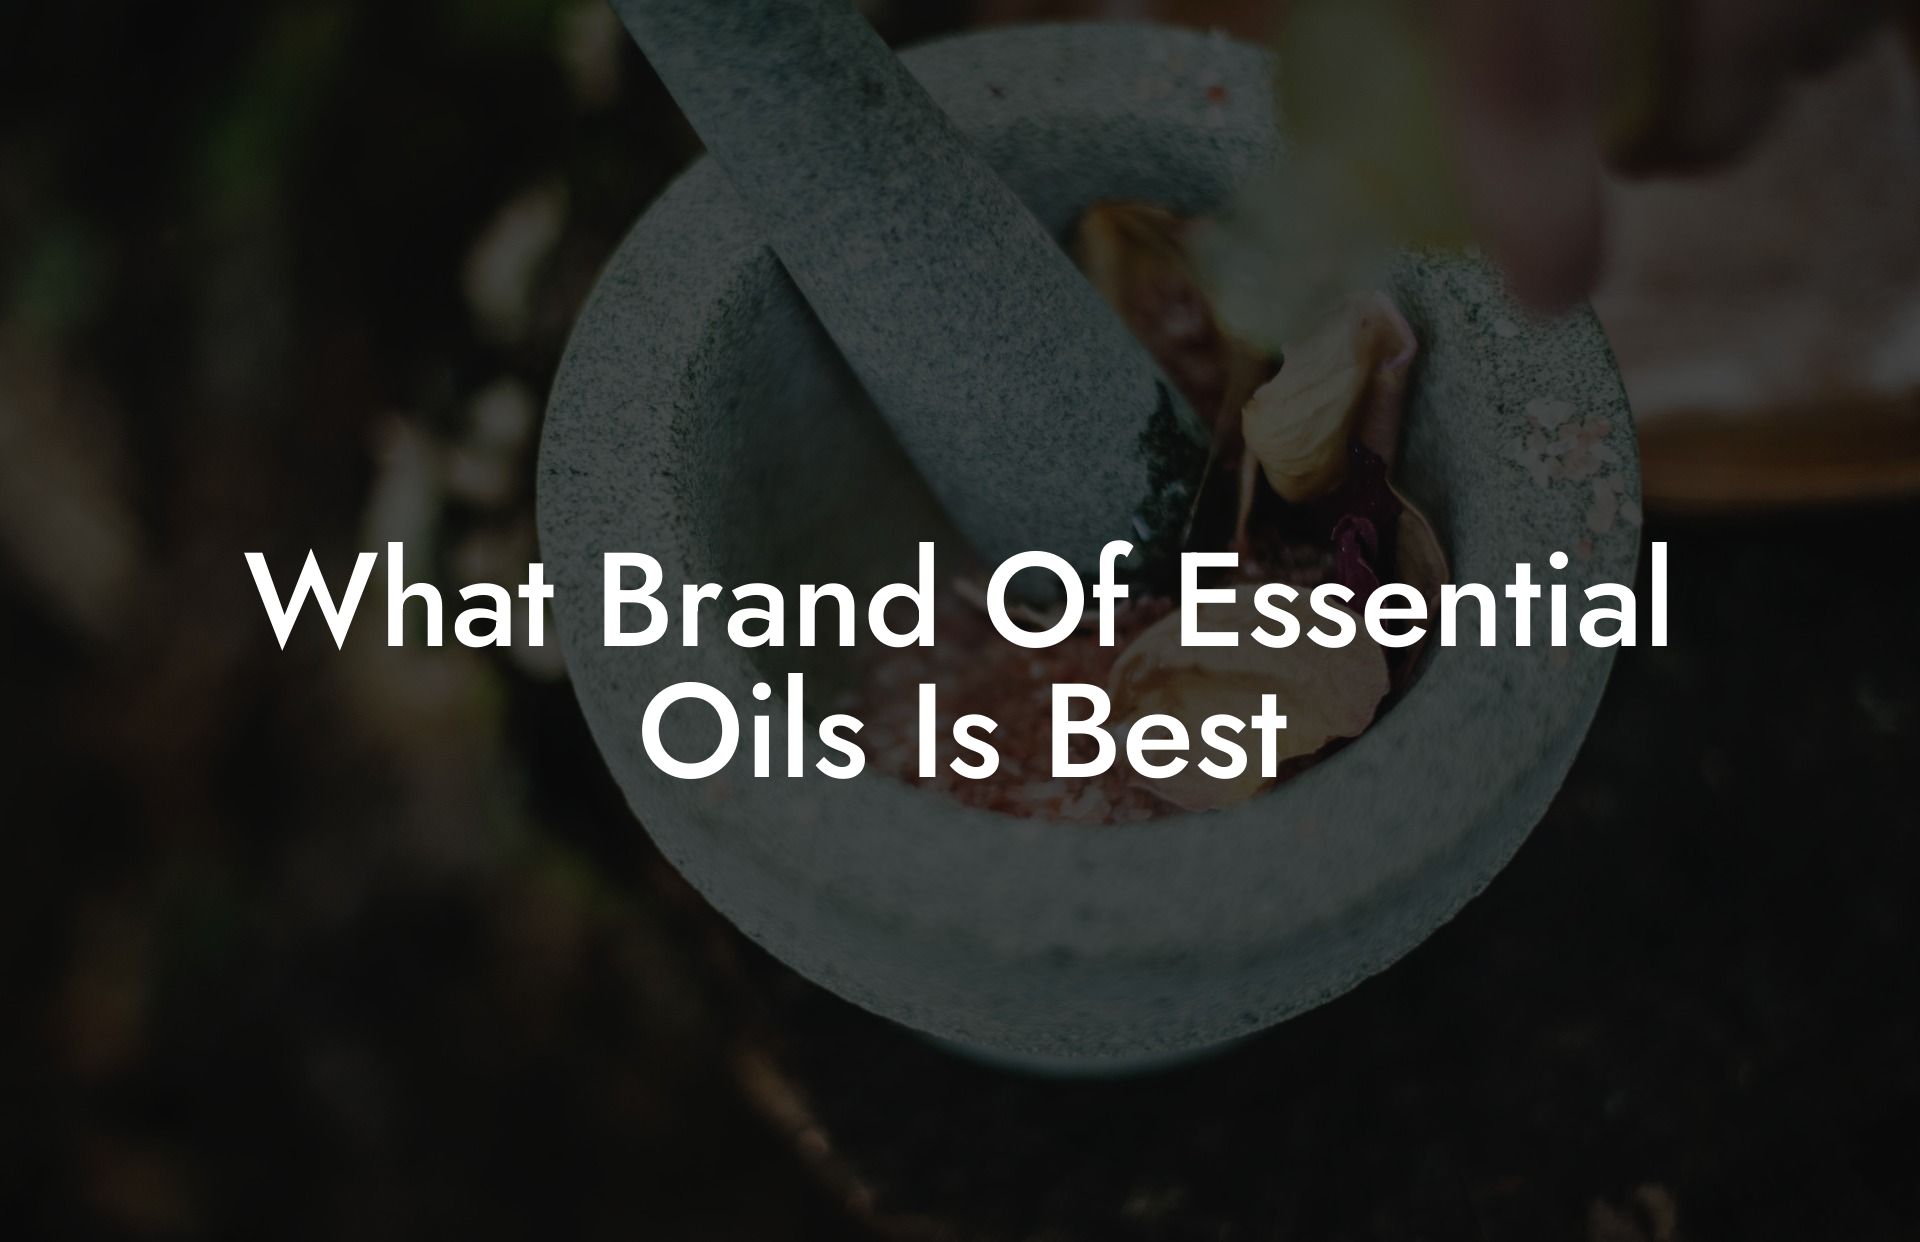 What Brand Of Essential Oils Is Best